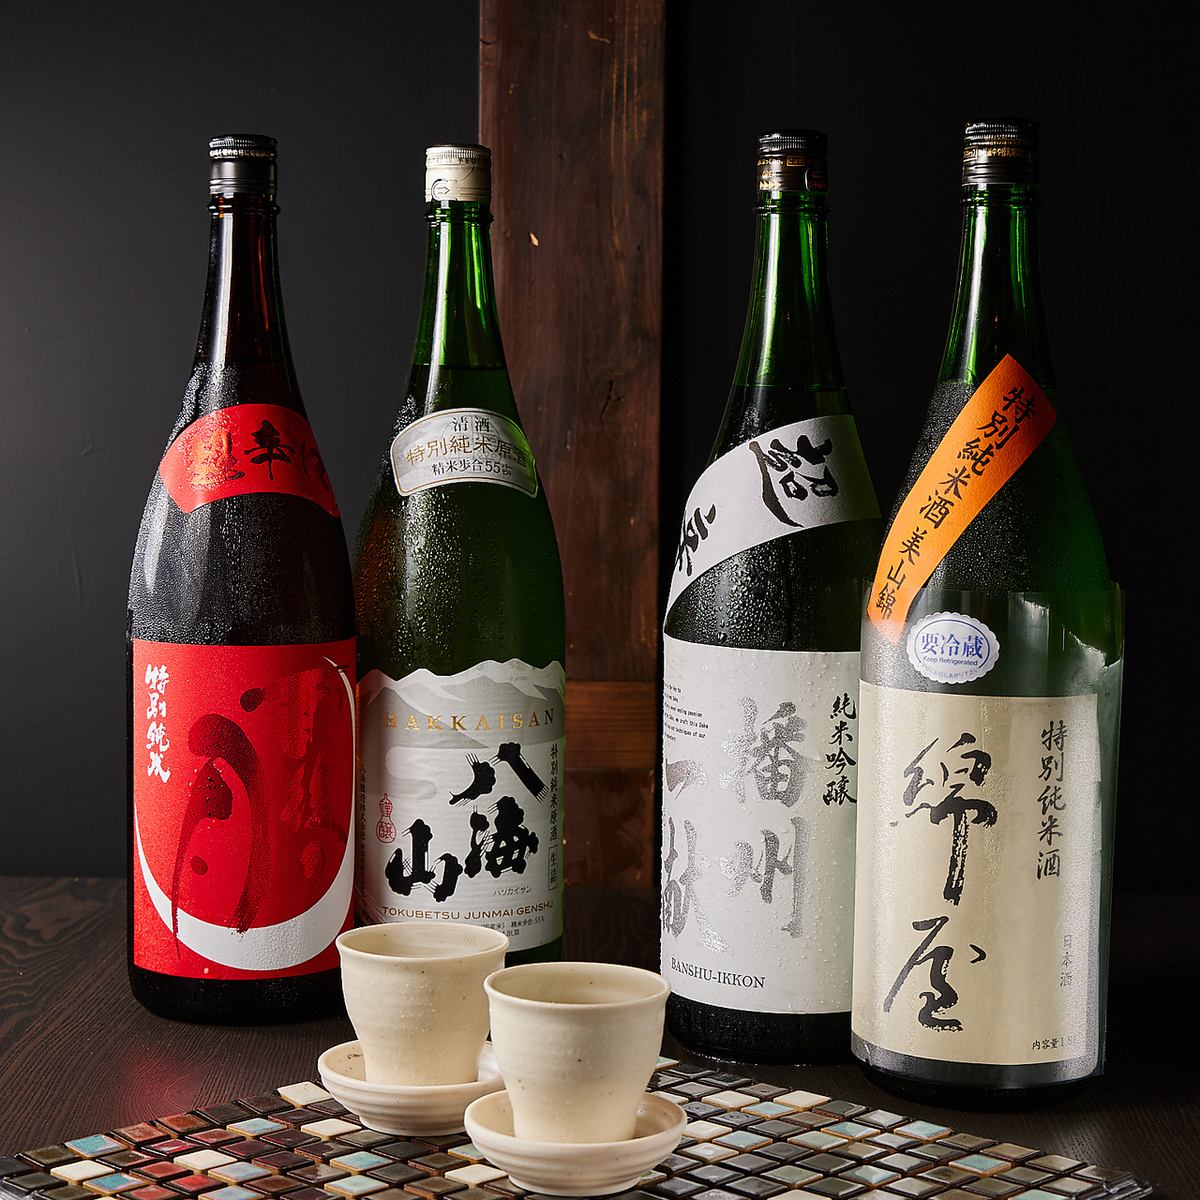 We have a wide variety of shochu and local sake that go well with shabu-shabu.